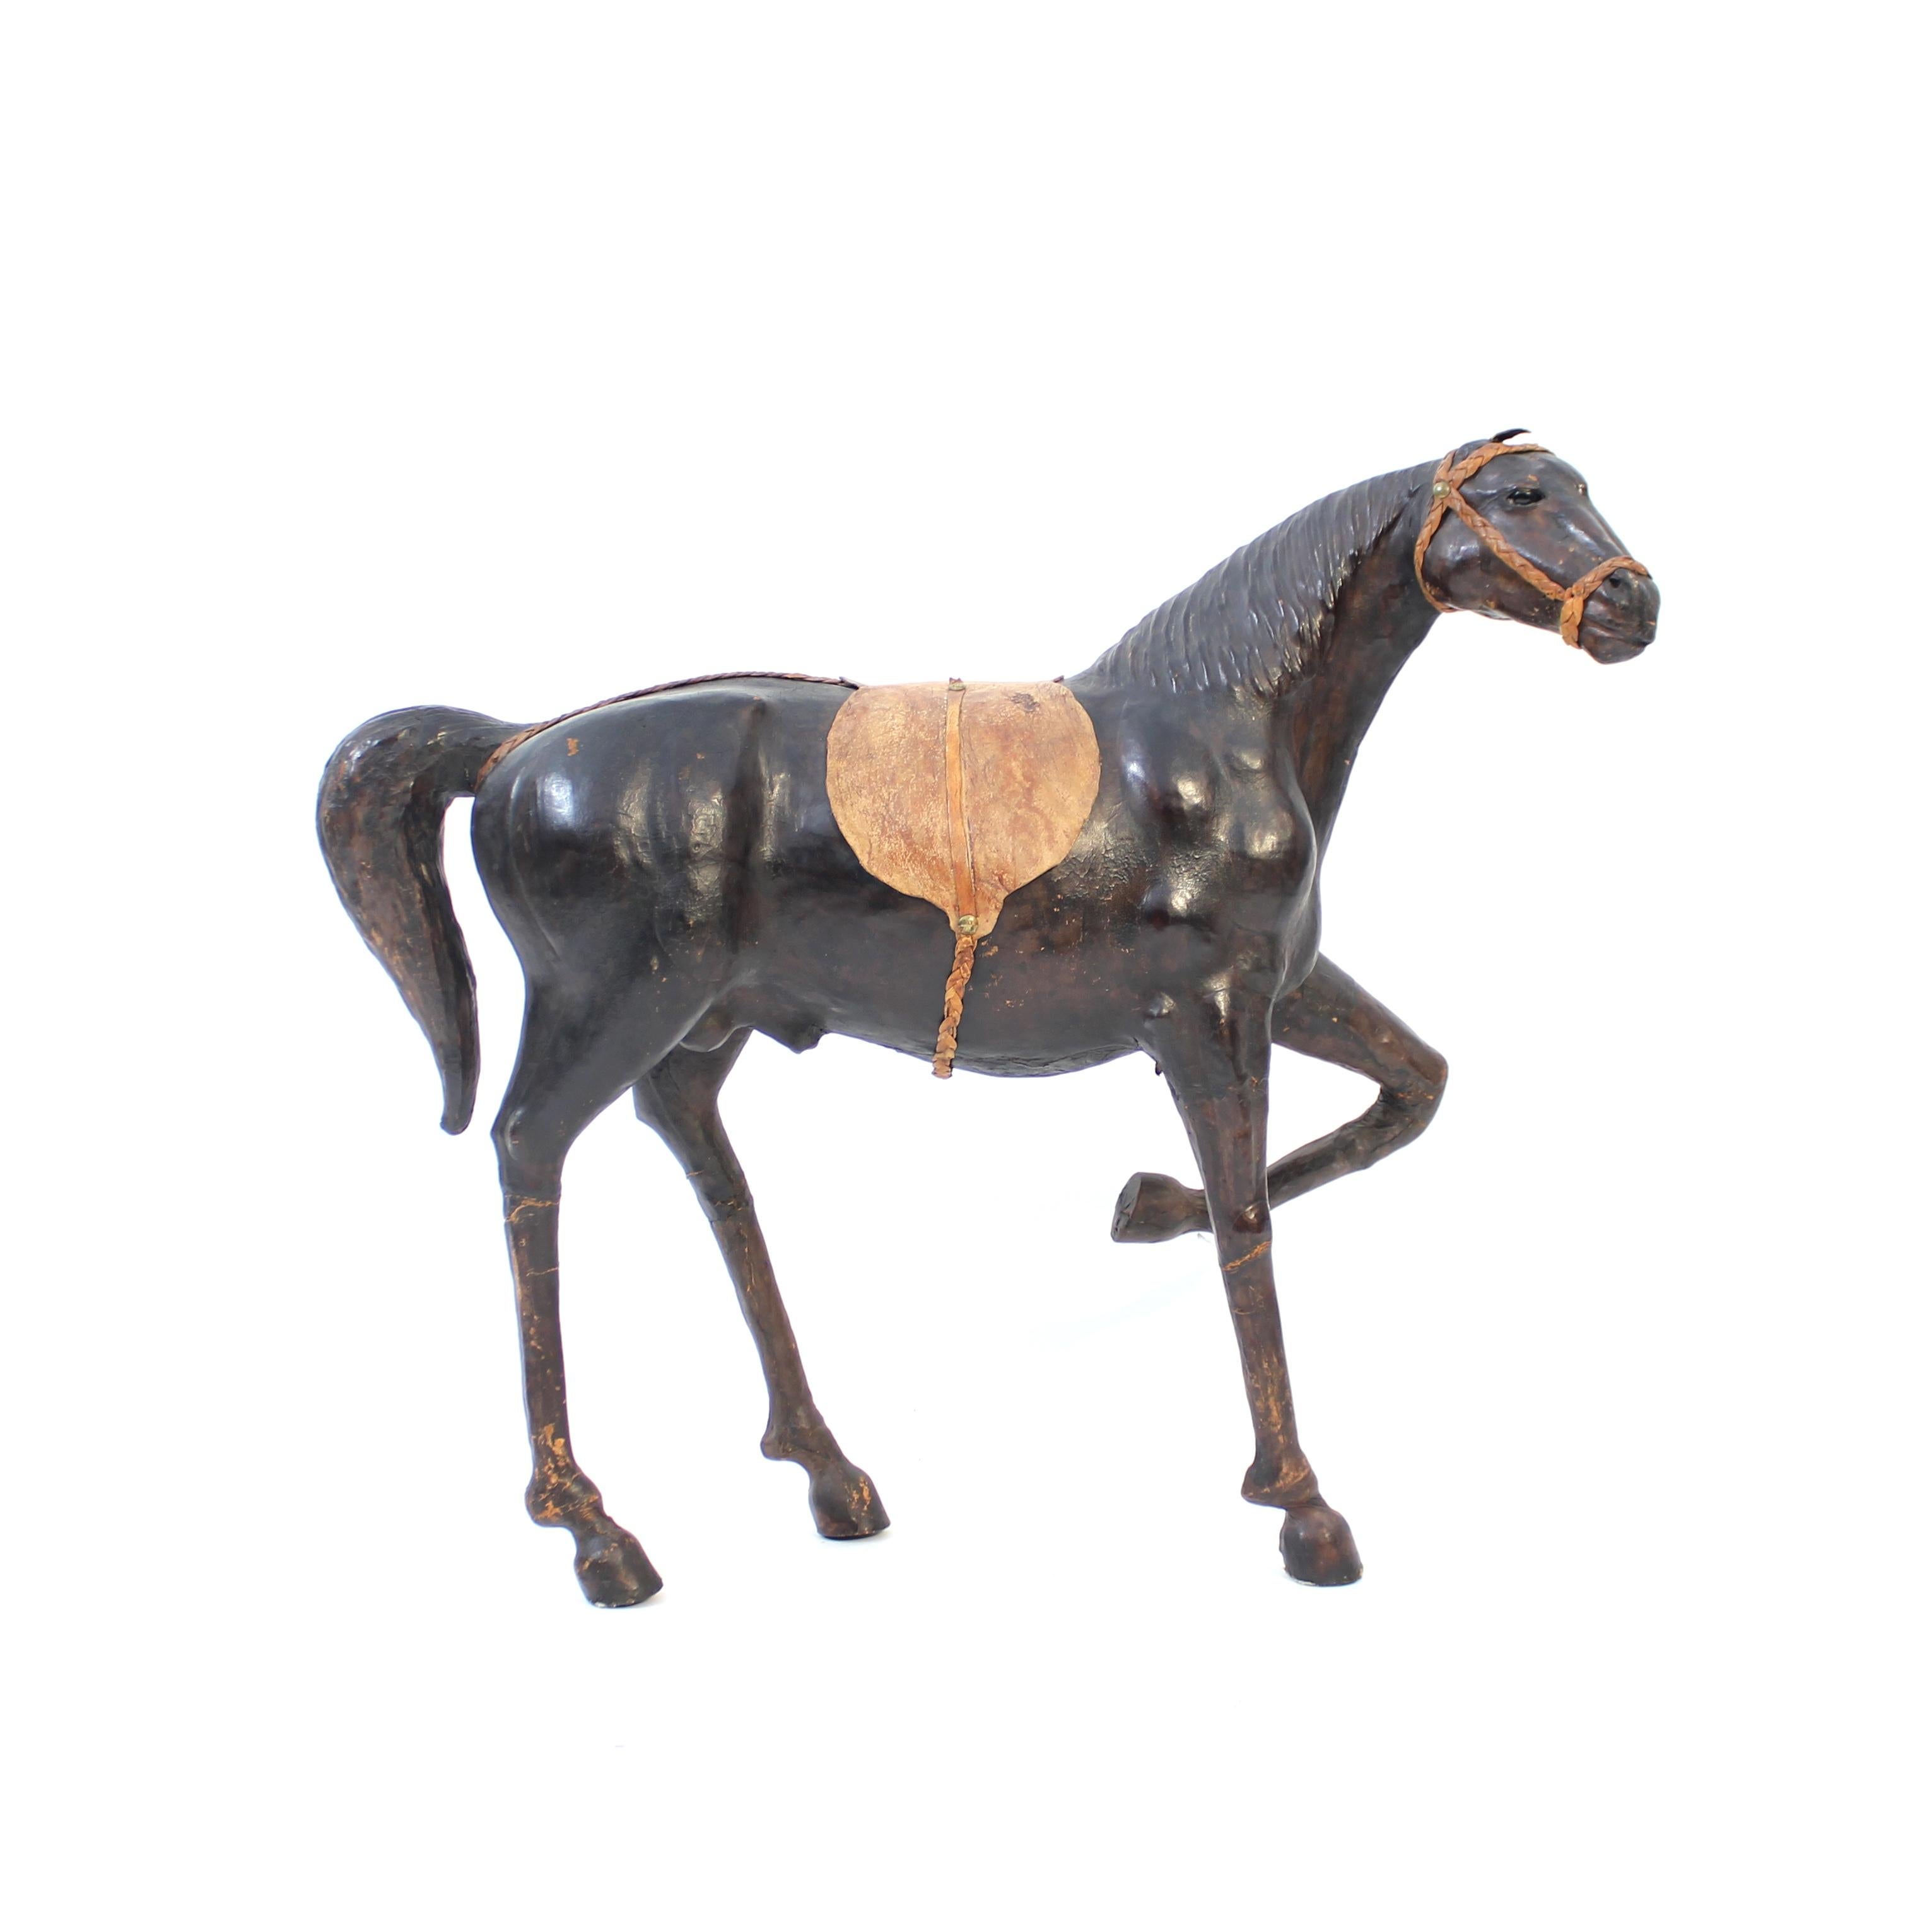 Large and majestic horse sculpture / model made of genuine leather from the 1960s or 1970s. Well made with good proportions and details. Very decorative and would be a fun and cool piece for any kind of interior from Scandinavian modern to eclectic.